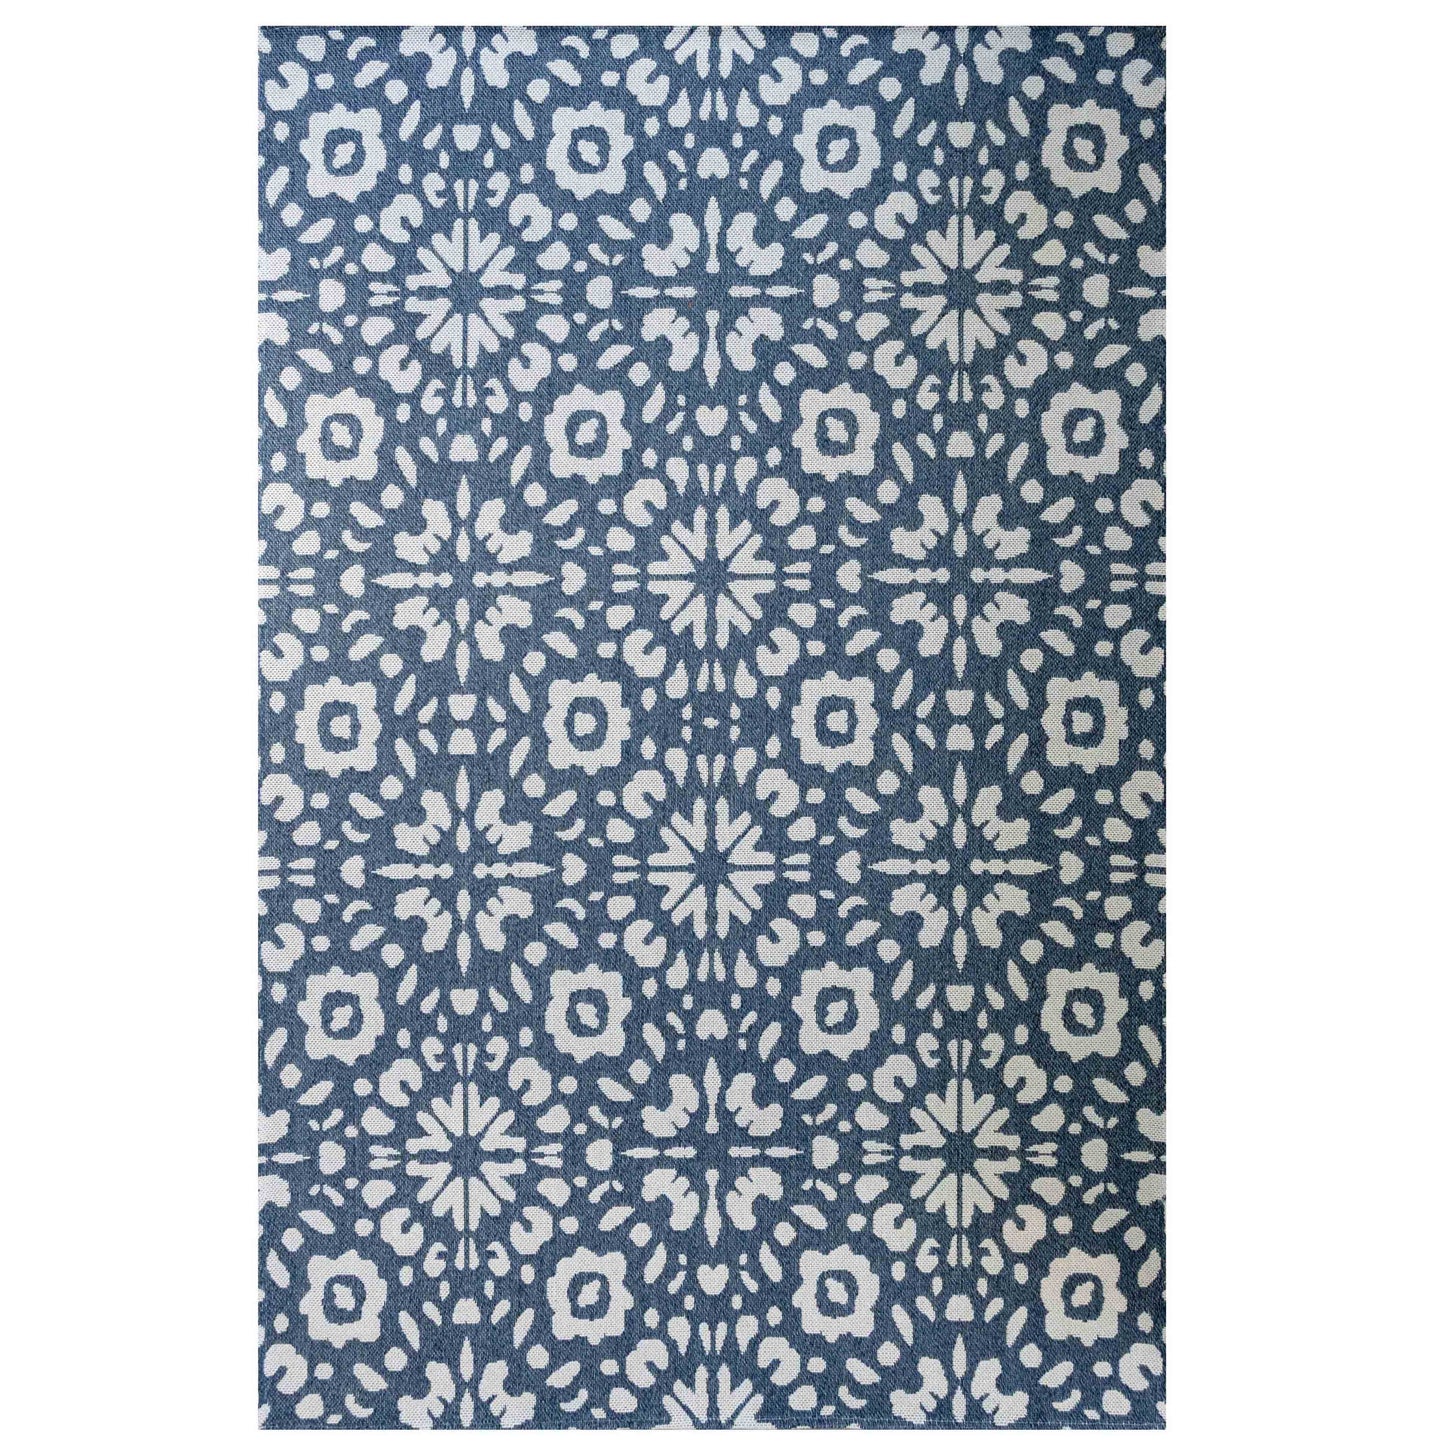 Blue Floral Recycled Cotton Rug